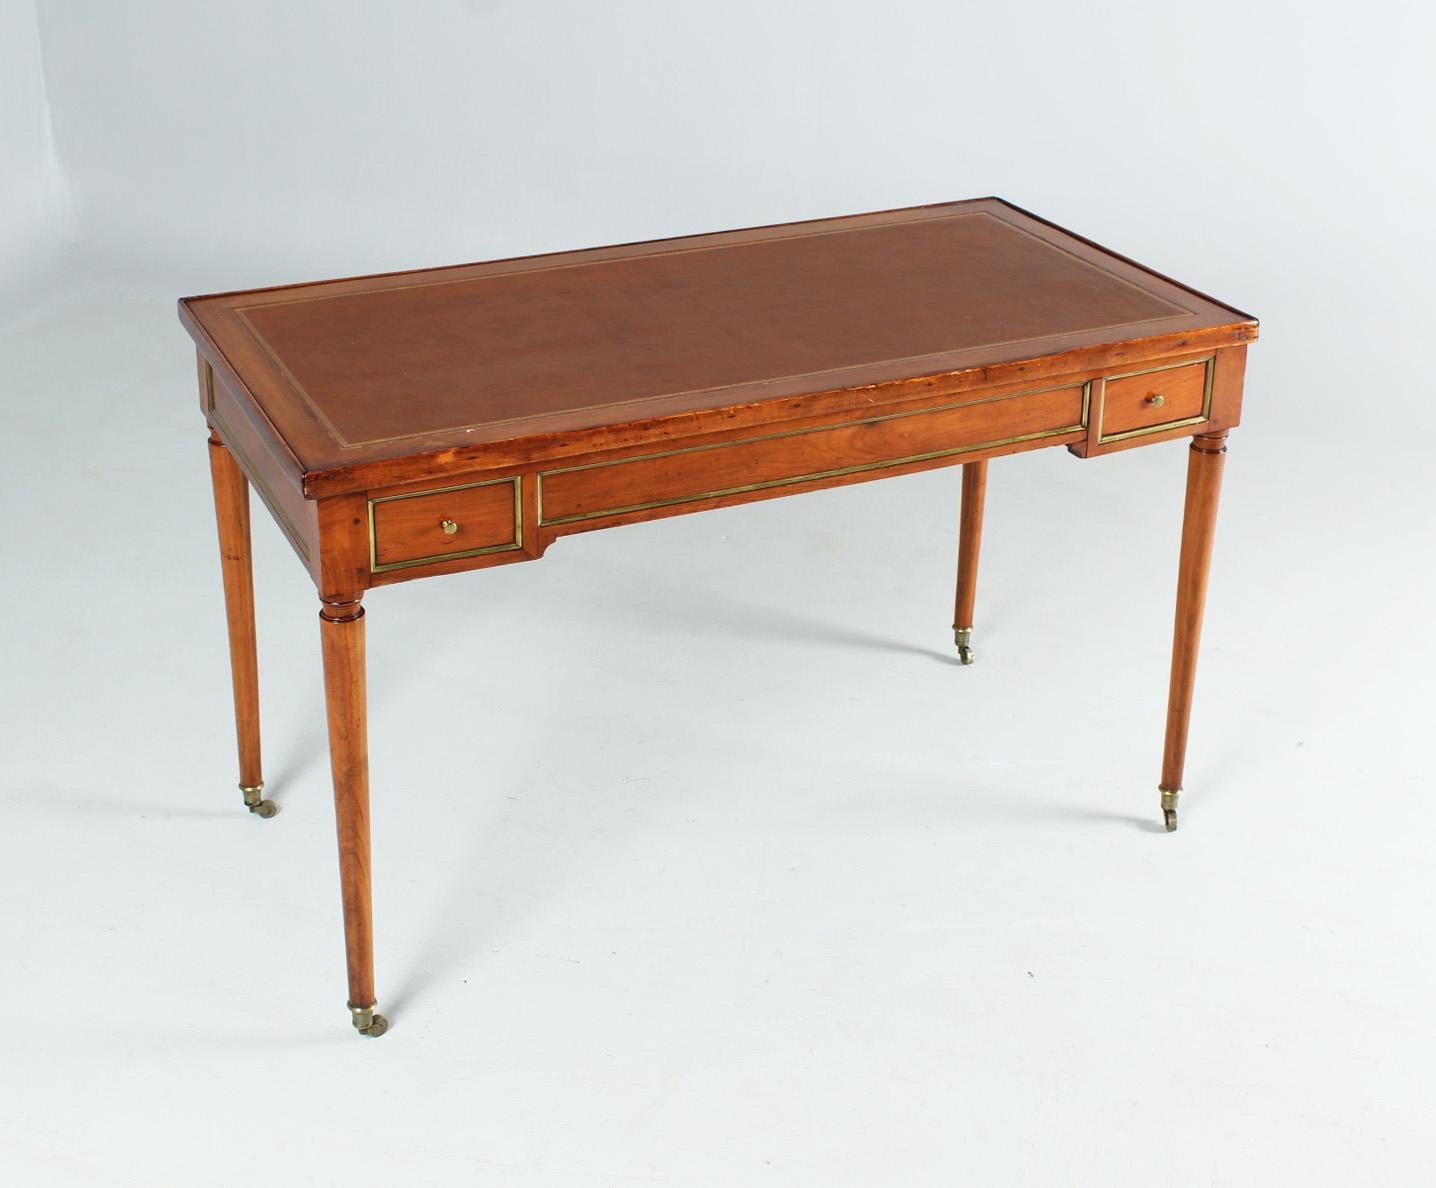 Antique Backgammon Table, so-called Tric Trac Table, Cherry, France, Louis XVI 1